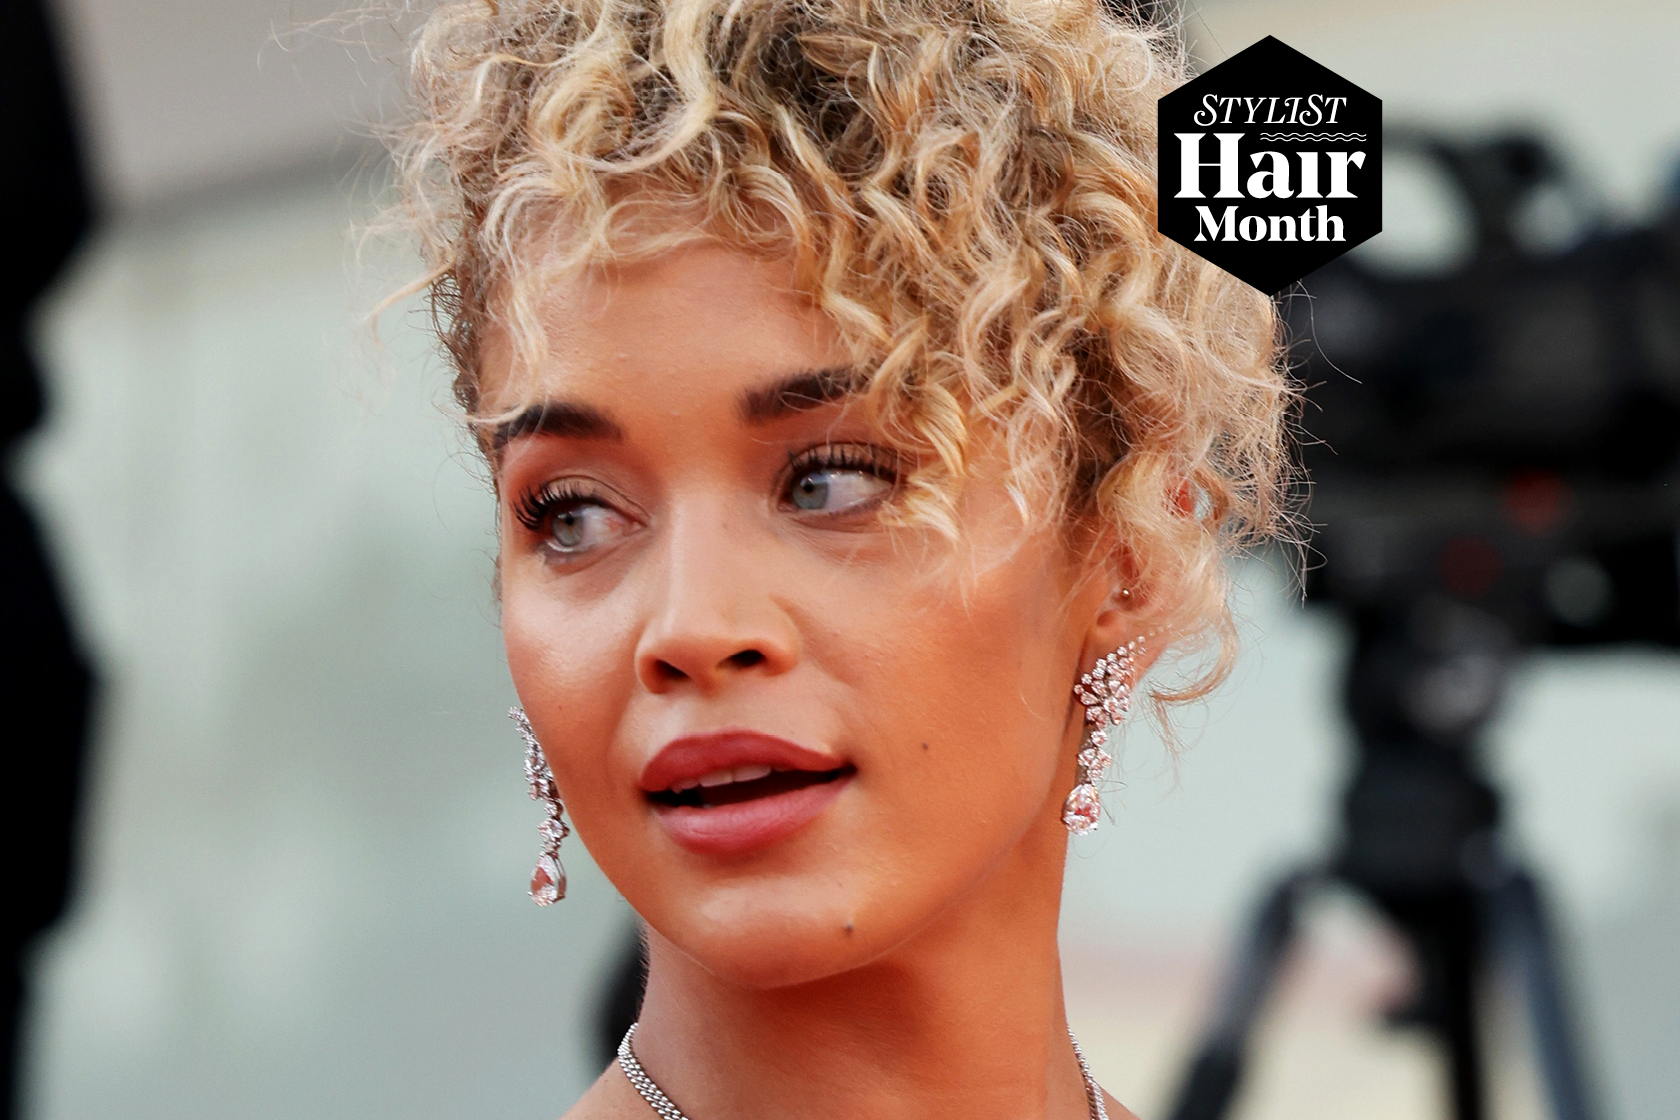 5 Things to Know Before Cutting a Curly Fringe or Bangs